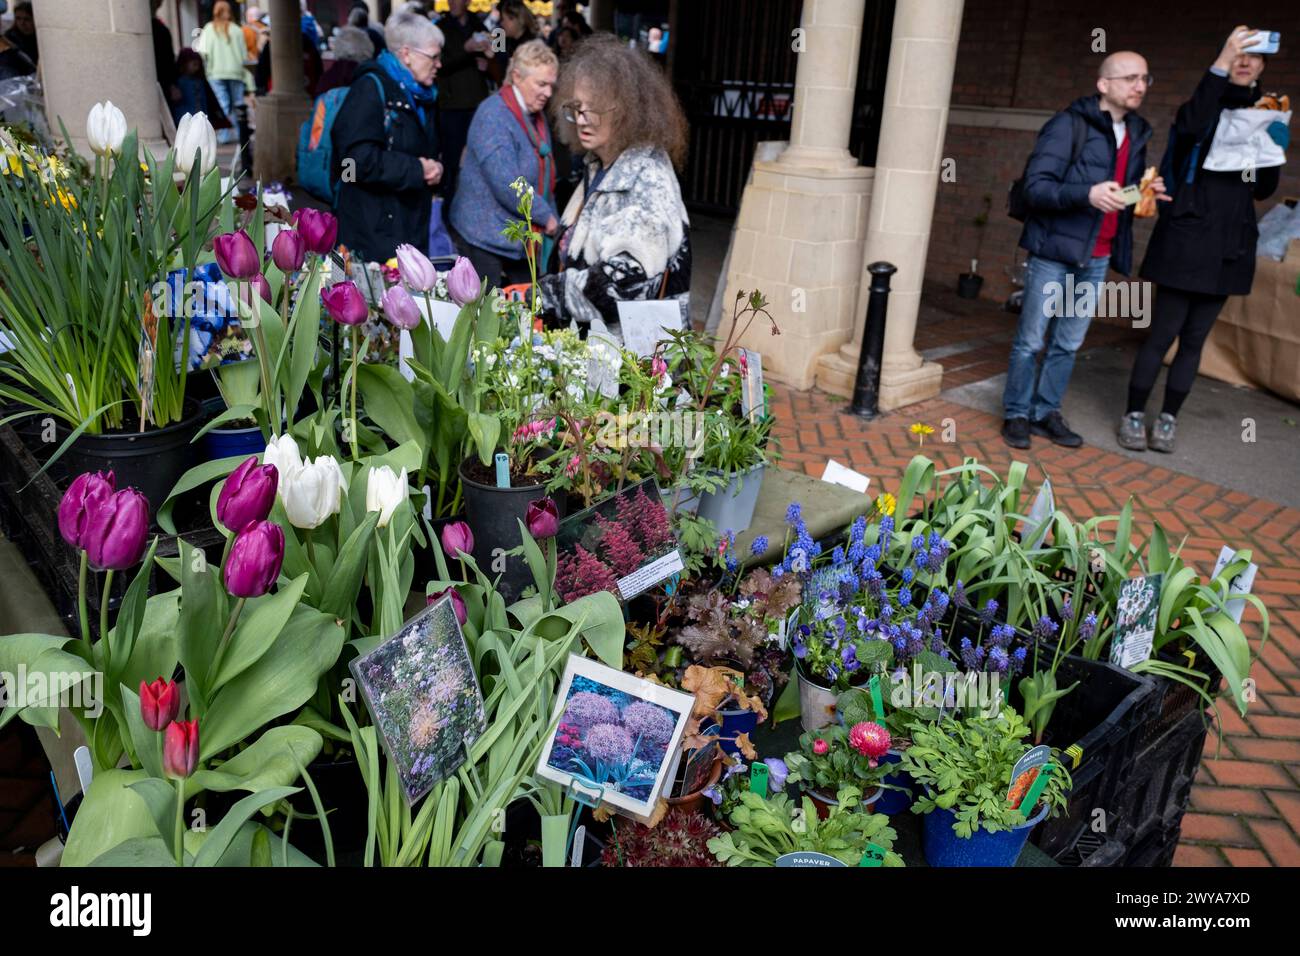 People browsing a plant stall at Stroud Farmers Market on 30th March 2024 in Stroud, United Kingdom. Stroud is a market town and civil parish in Gloucestershire, known particularly for its thriving farmers market which takes place every Saturday, specialising in the best local produce. Stock Photo